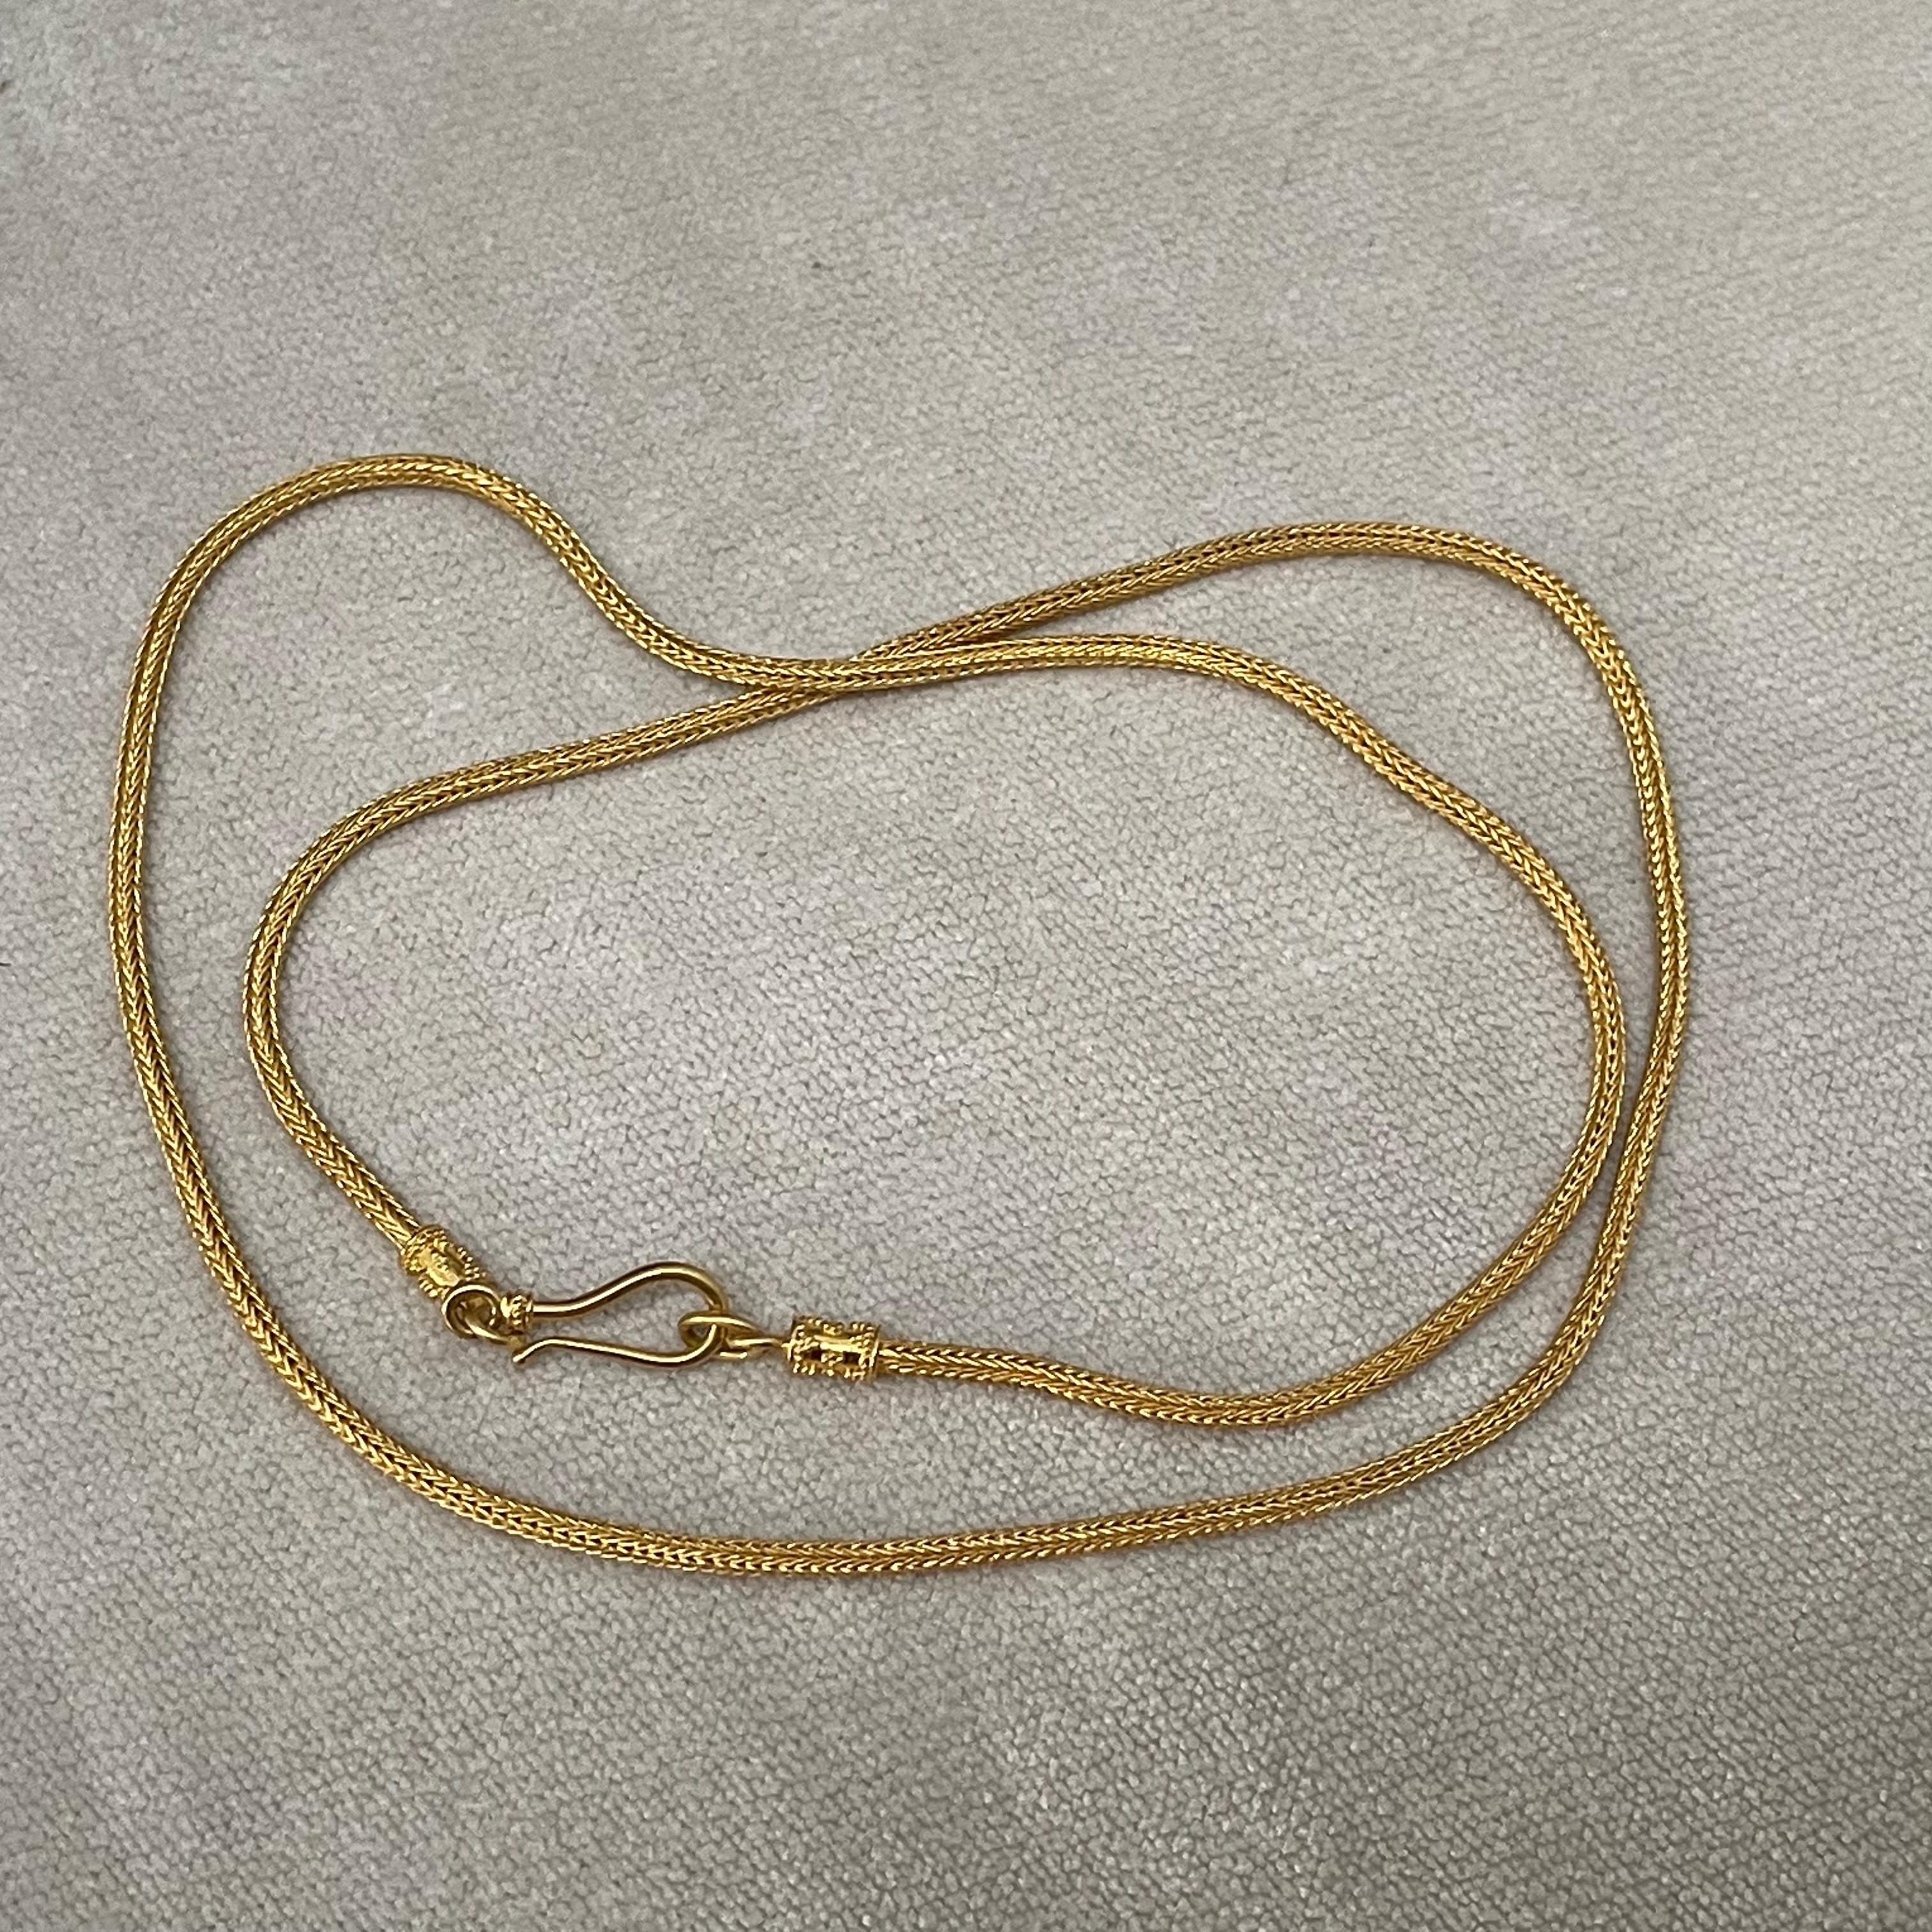 20 inches gold chain